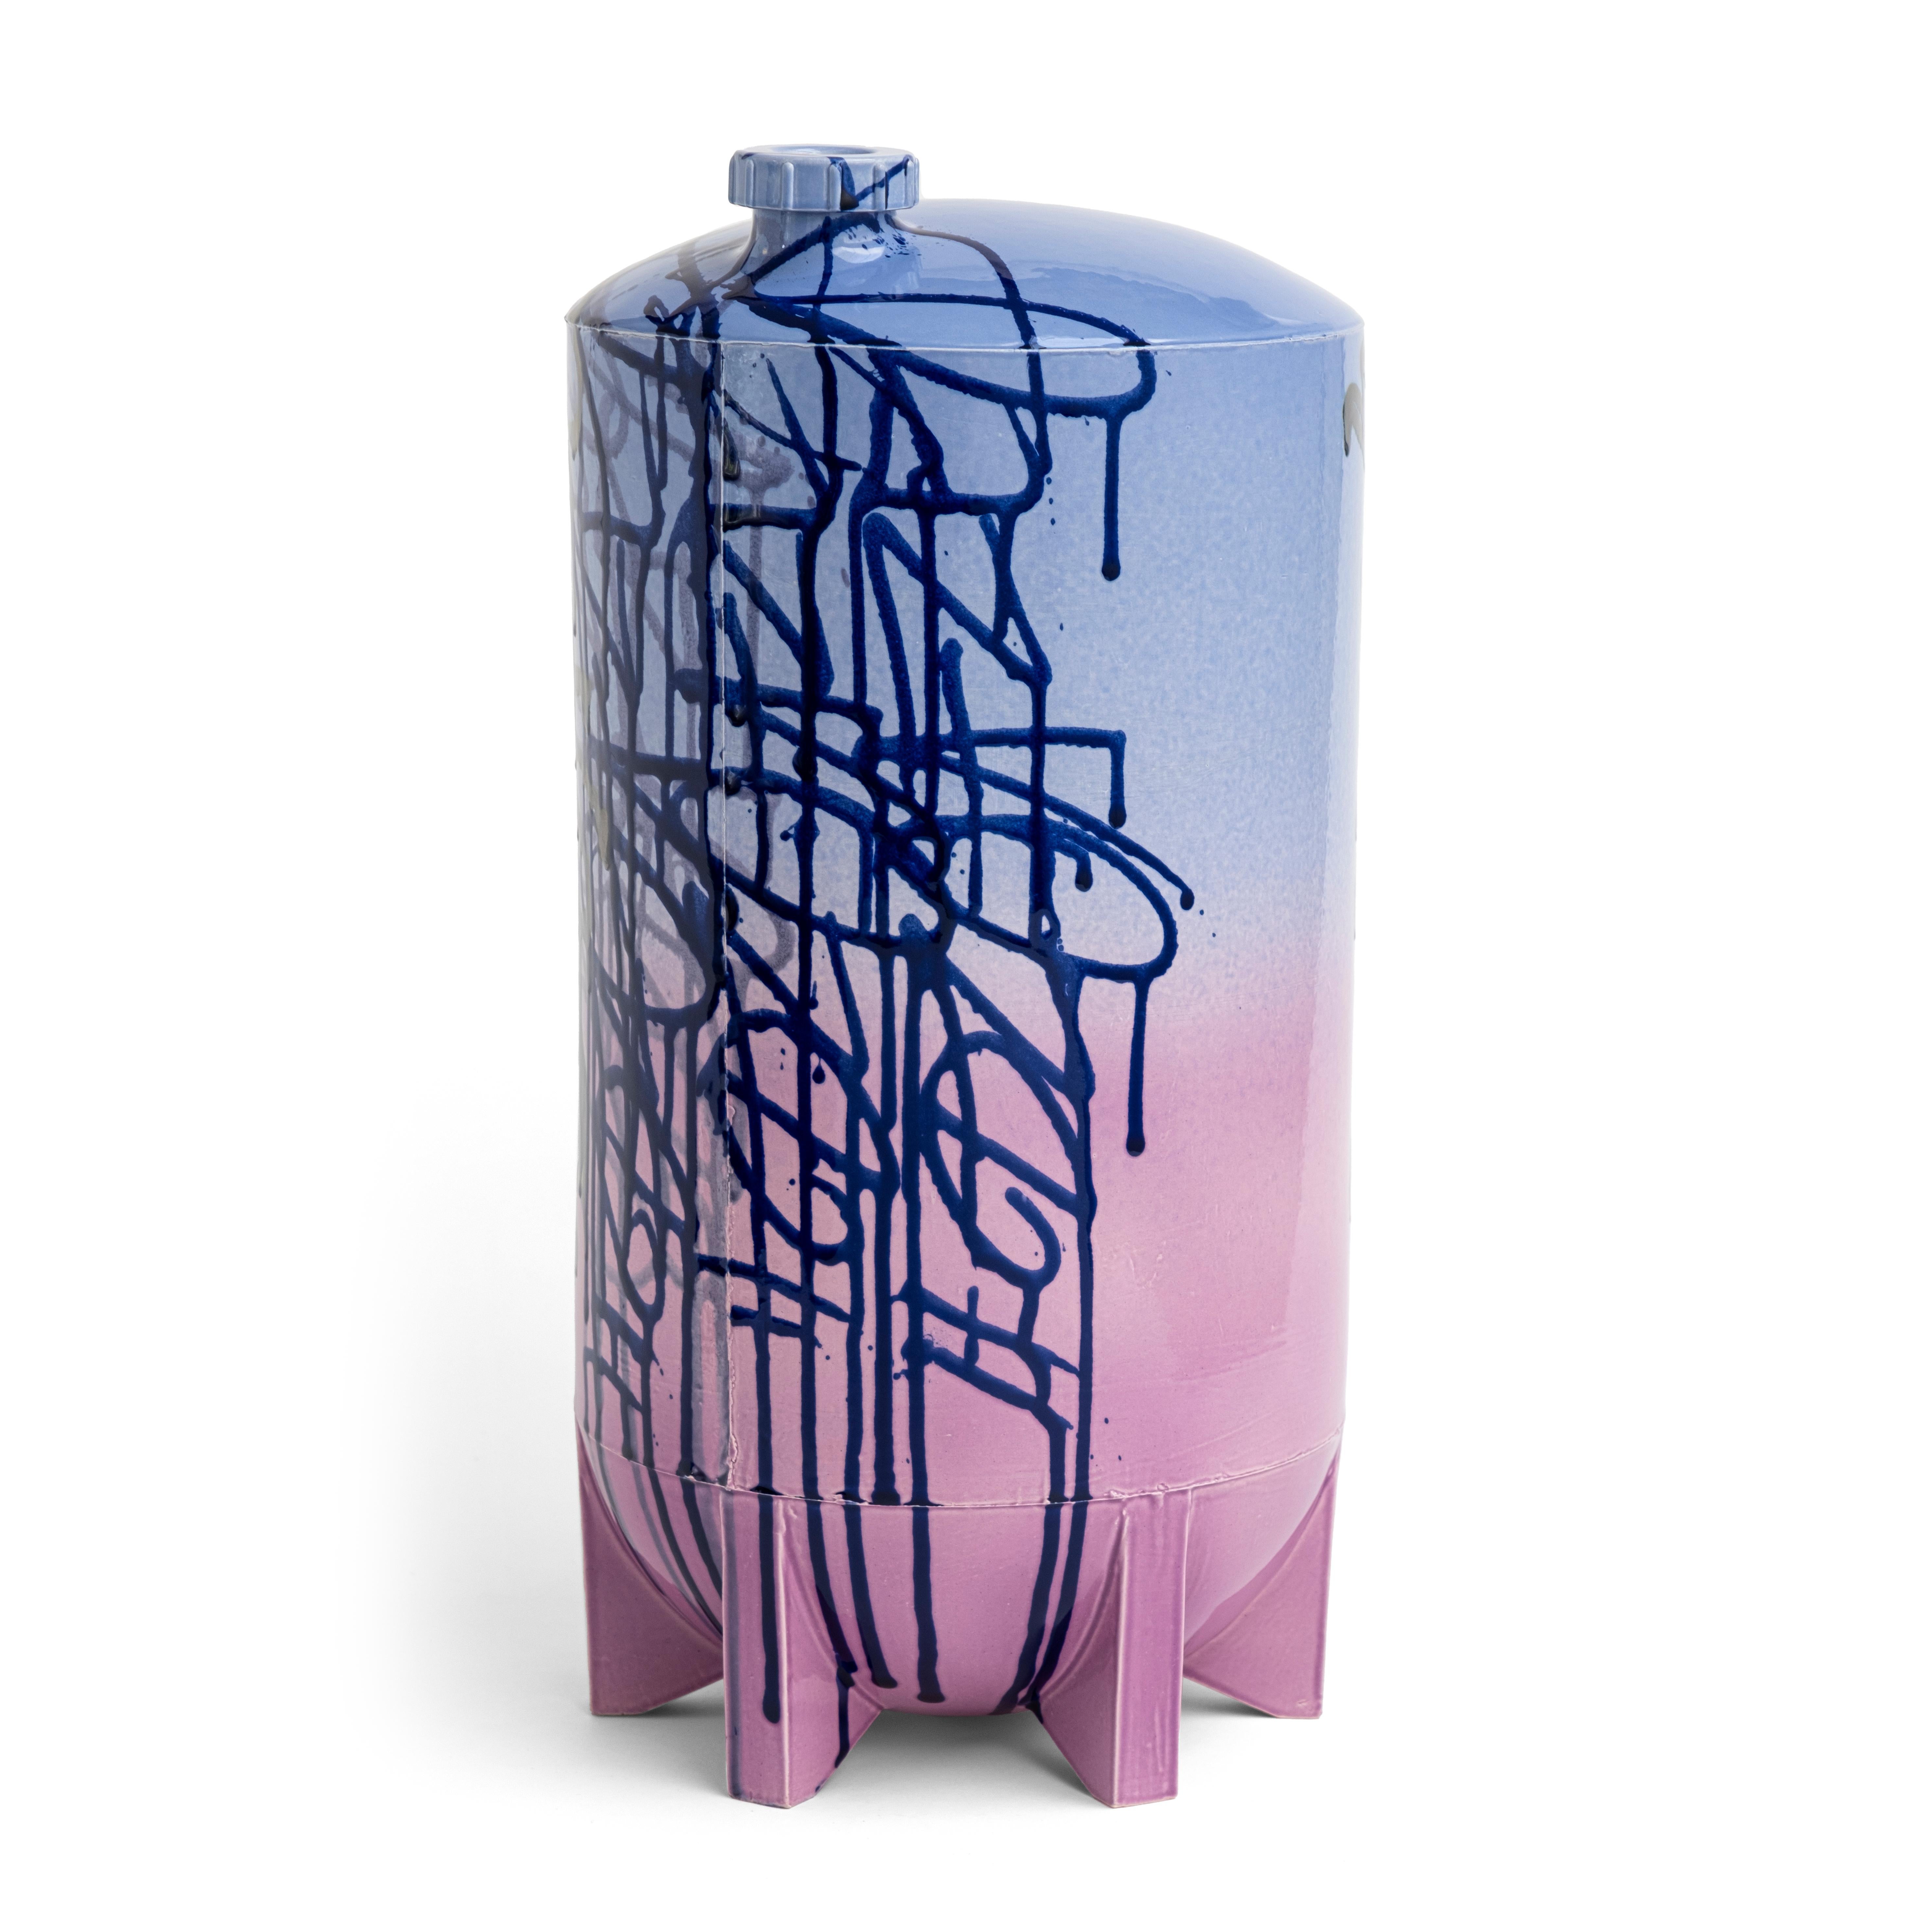 Under Pressure 11 by Yuri van Poppel.
Dimensions: D 27 x H 55 cm.
One of a kind.
Material: earthenware, layered ceramic glazes, various colours.
Handmade and spray-painted by hand by SunkOne. Removable lid.

Everlasting graffiti spray-painted